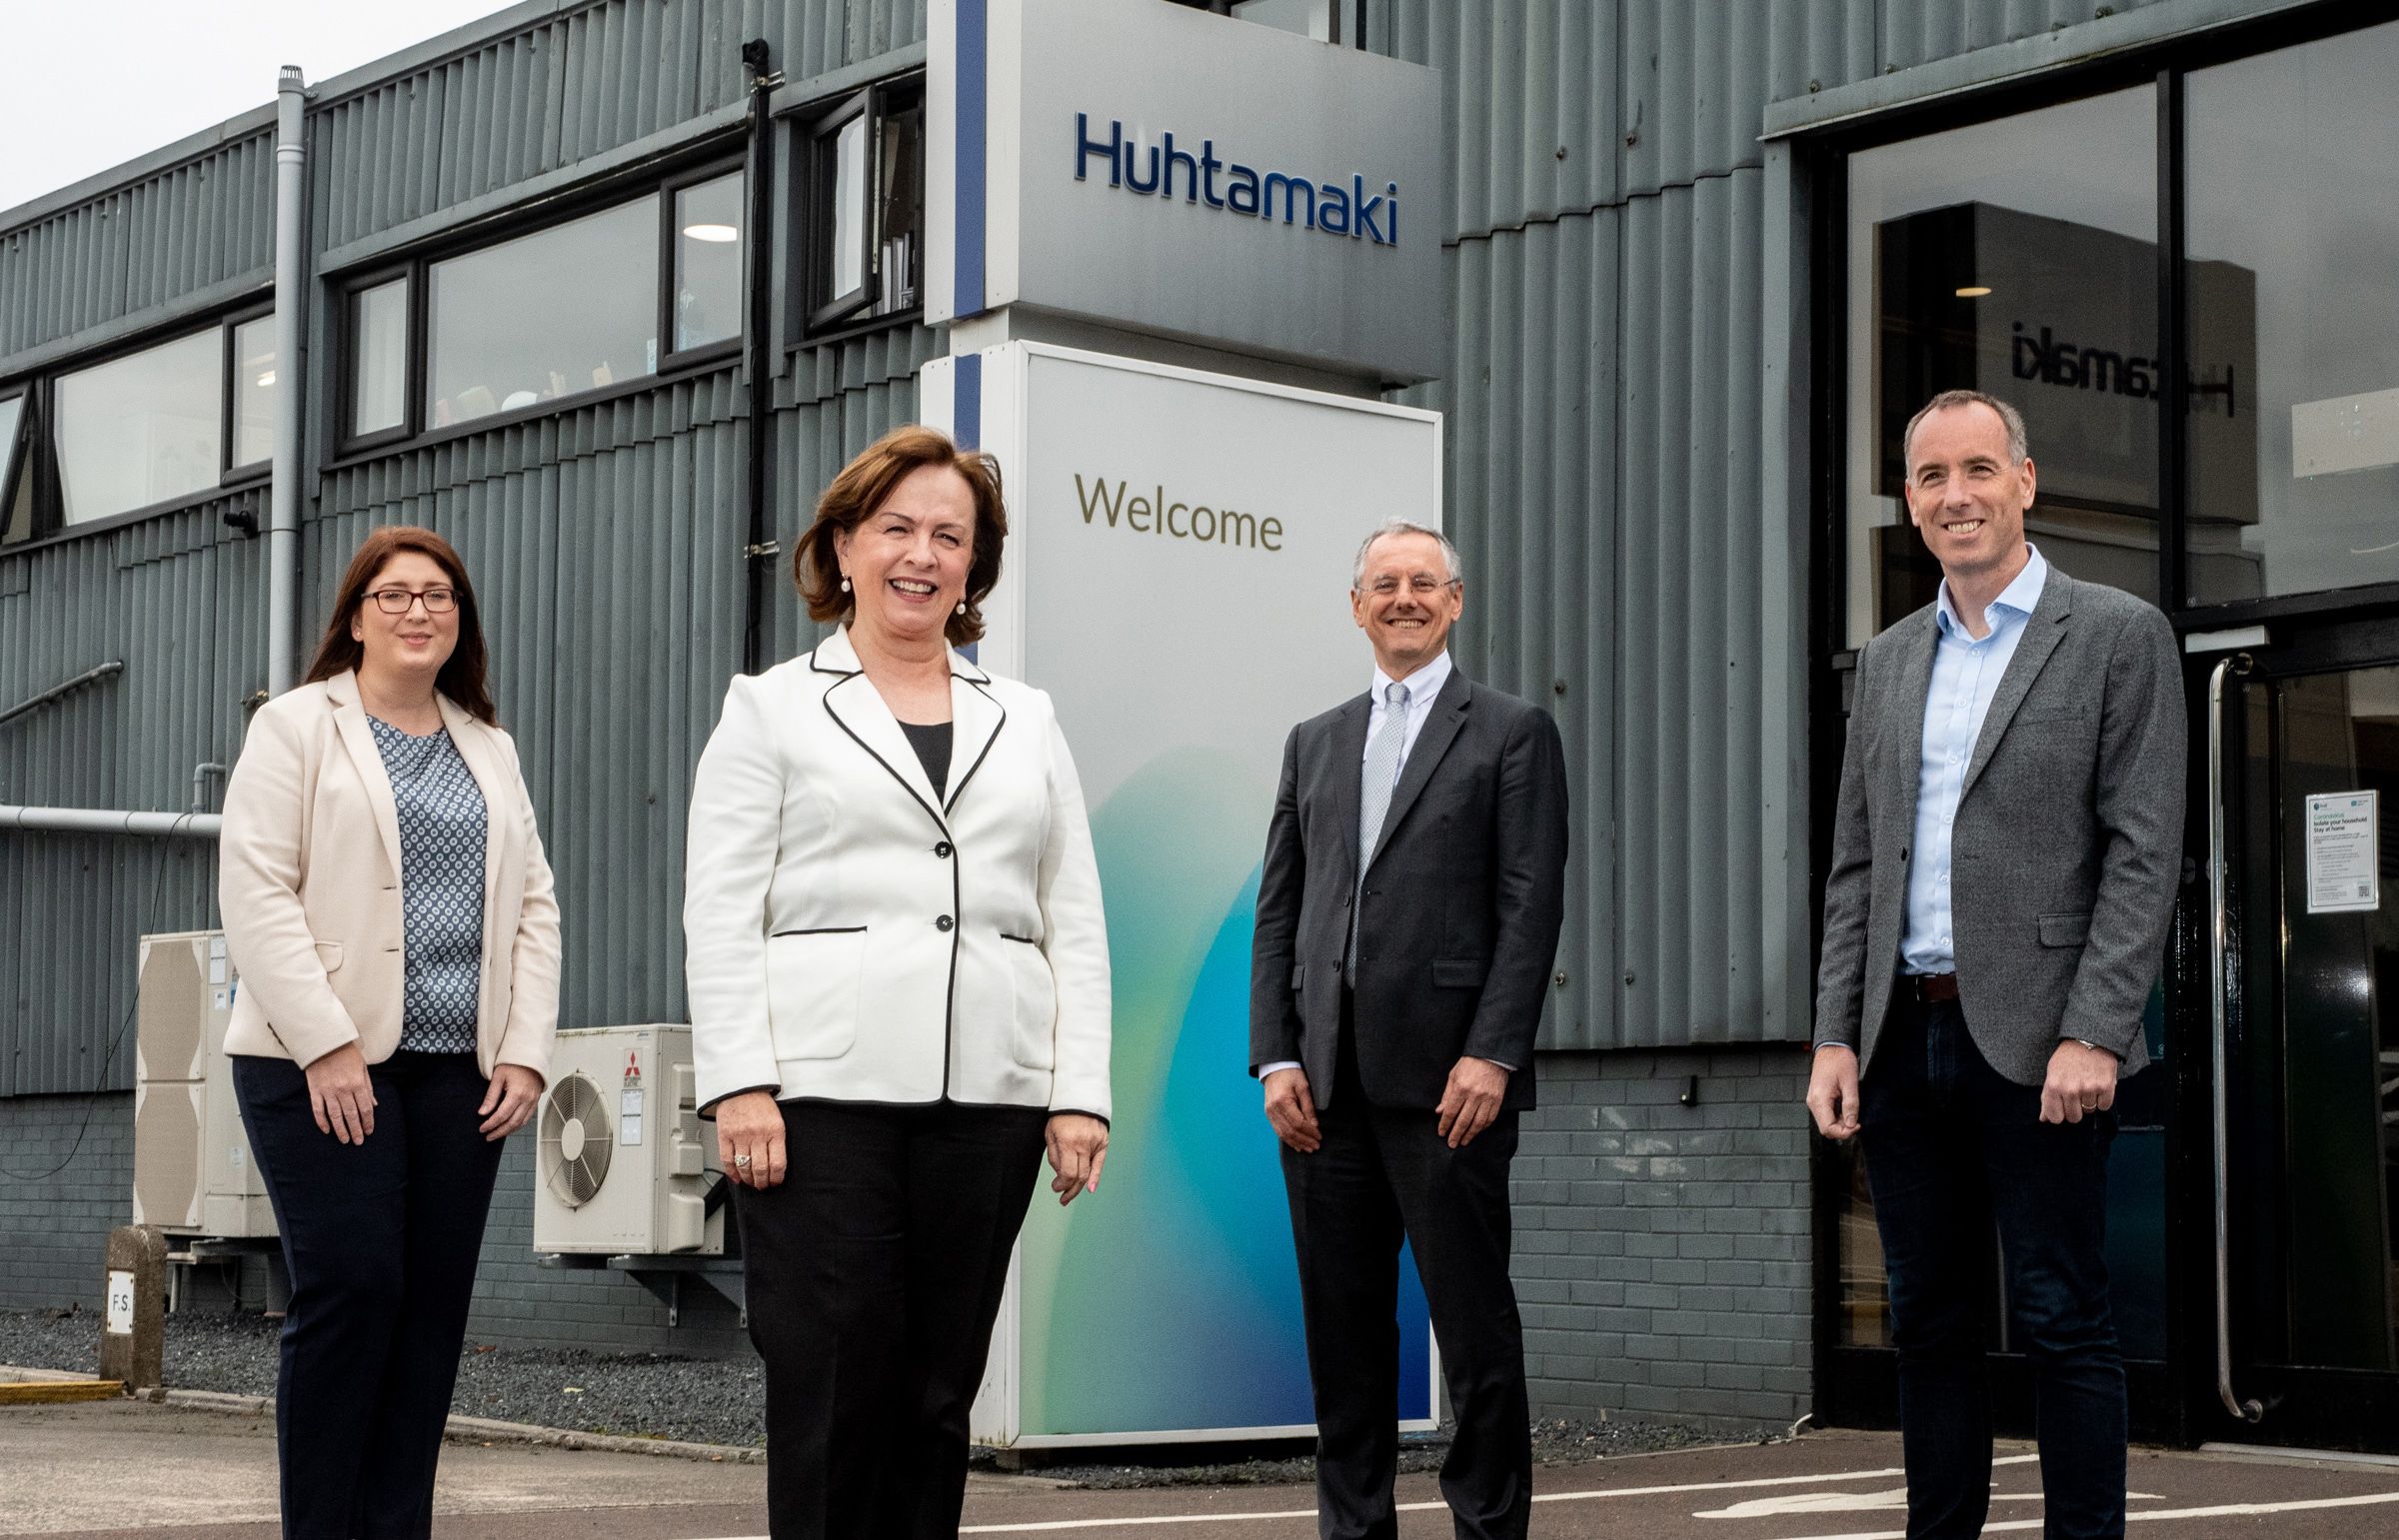 BOOST FOR LOCAL BUSINESS: Patricia Lavery, Site Director, Huhtamaki Belfast and Antrim, Minister for the Economy Diane Dodds, Kevin Holland, CEO of Invest NI and Ciaran Doherty, Huhtamaki UK General Manager.